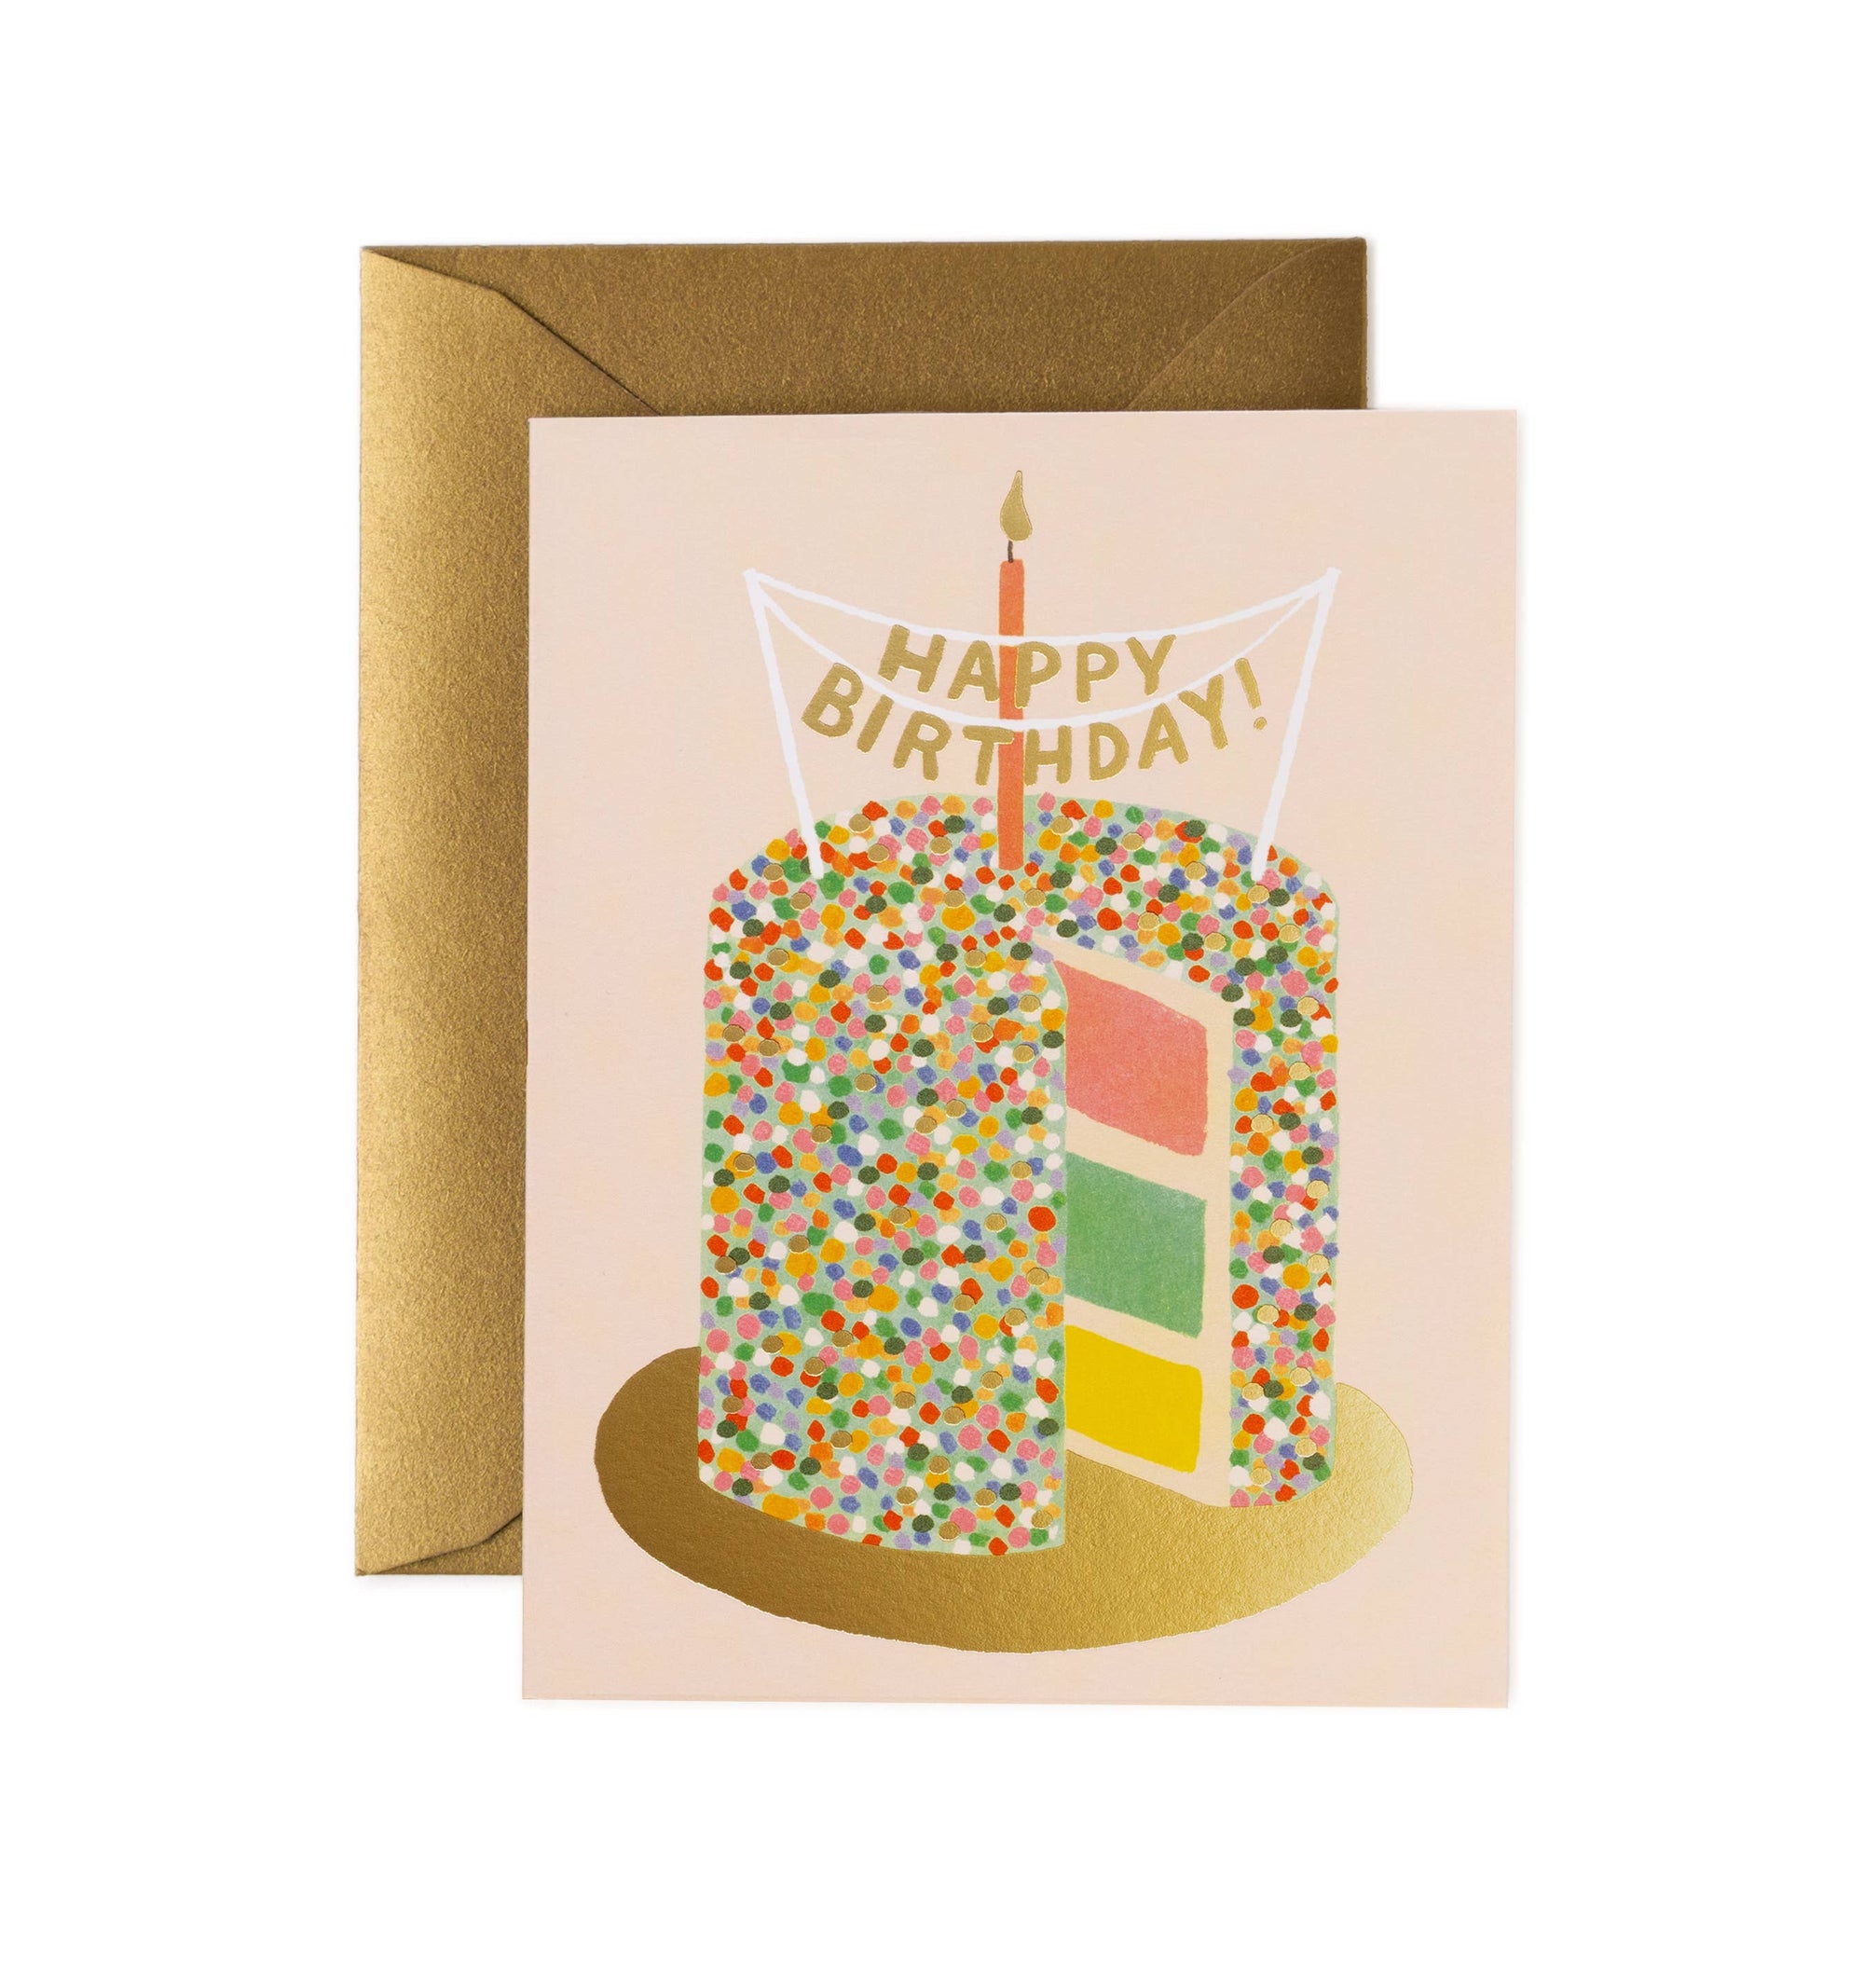 Layer Cake Card by Rifle Paper Co. - The Preppy Bunny